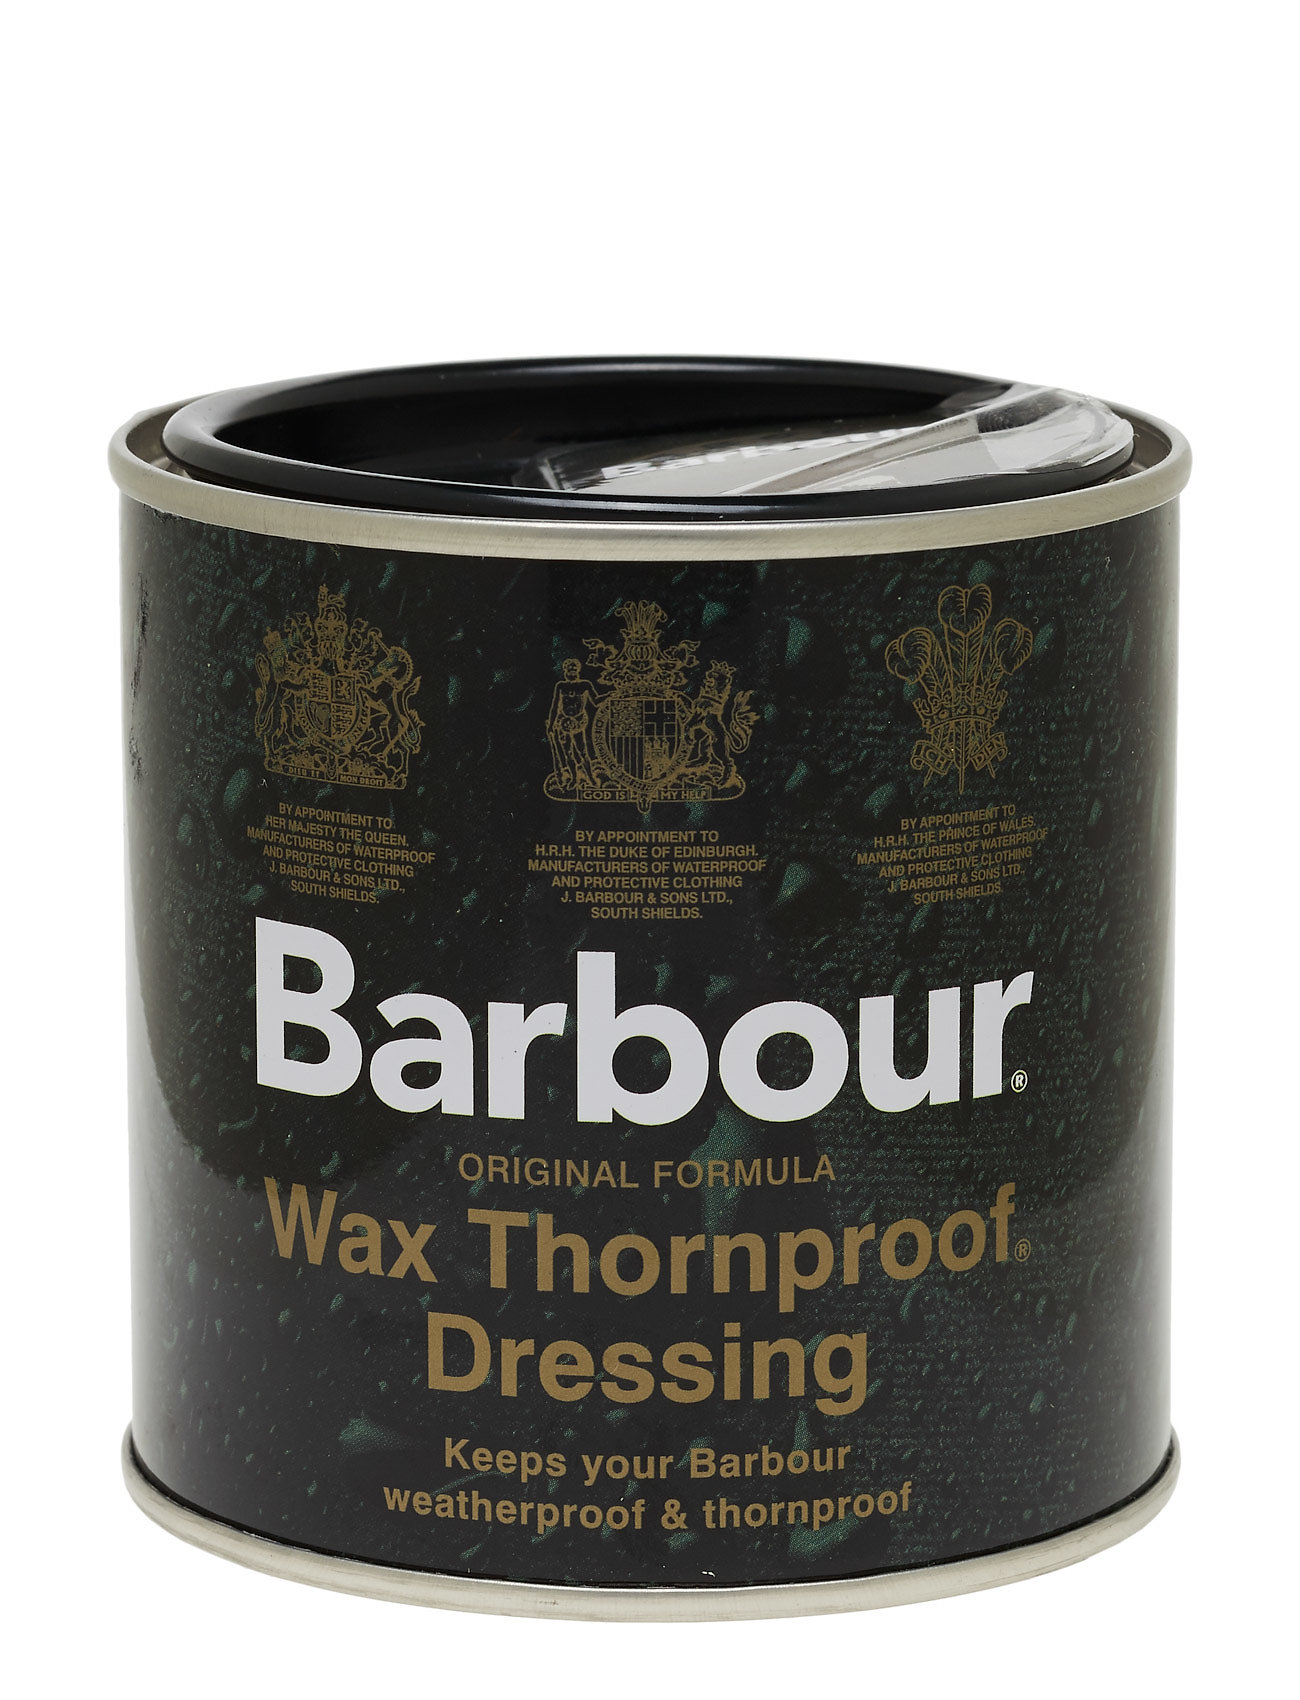 Thornproof Dressing/Wax Accessories Clothing Care Musta Barbour